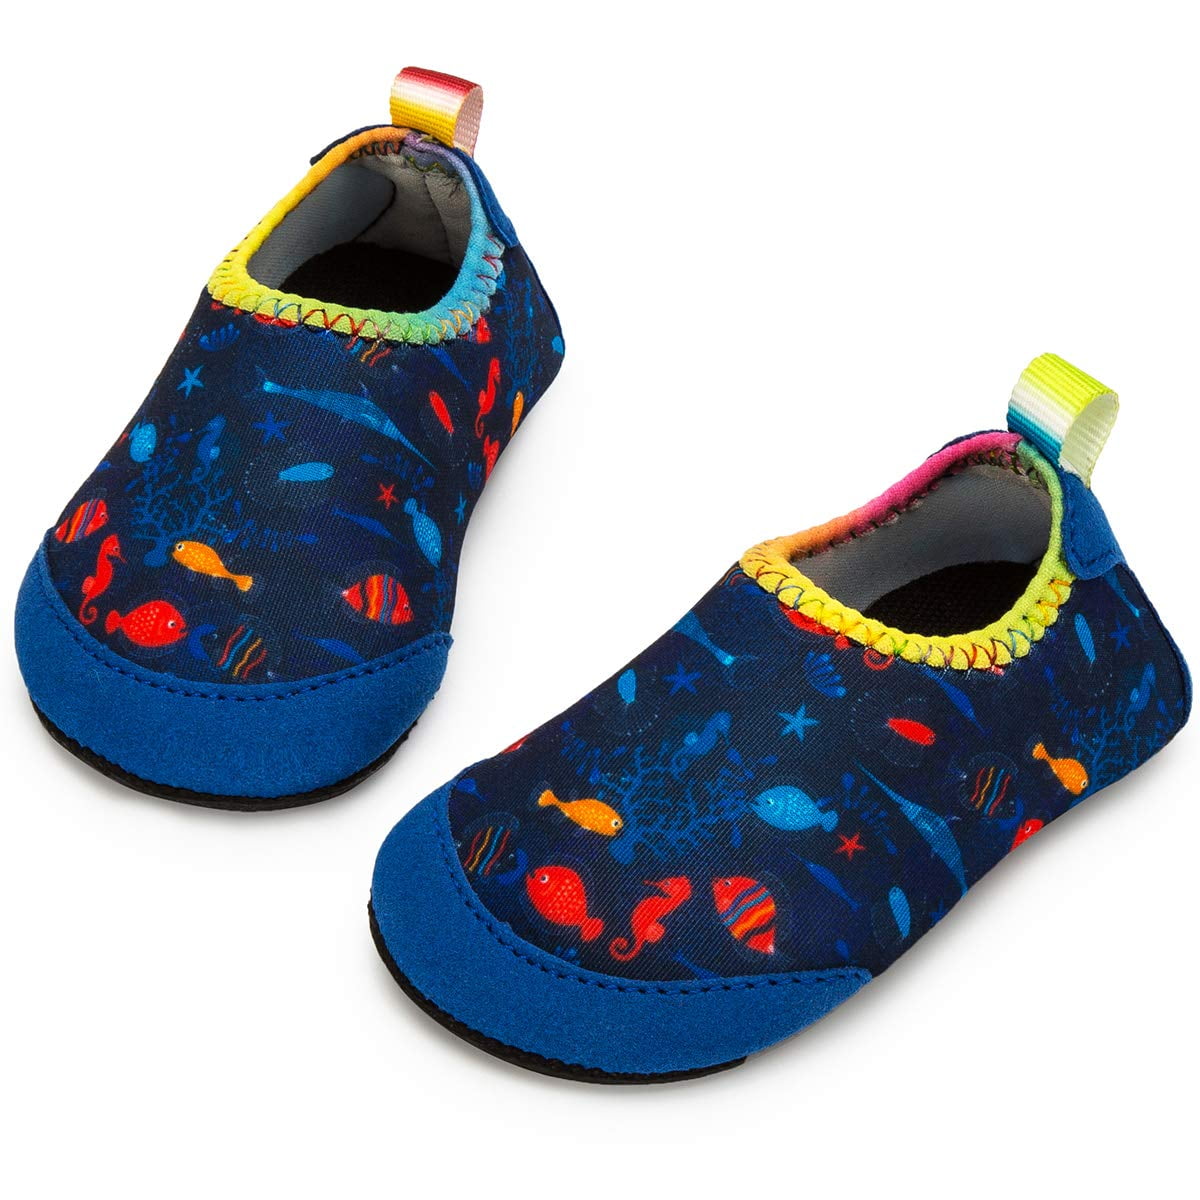 Apolter Baby Water Shoes Barefoot Swim Shoes Quick Dry Non-Slip Aqua Socks for Toddler Boys Girls